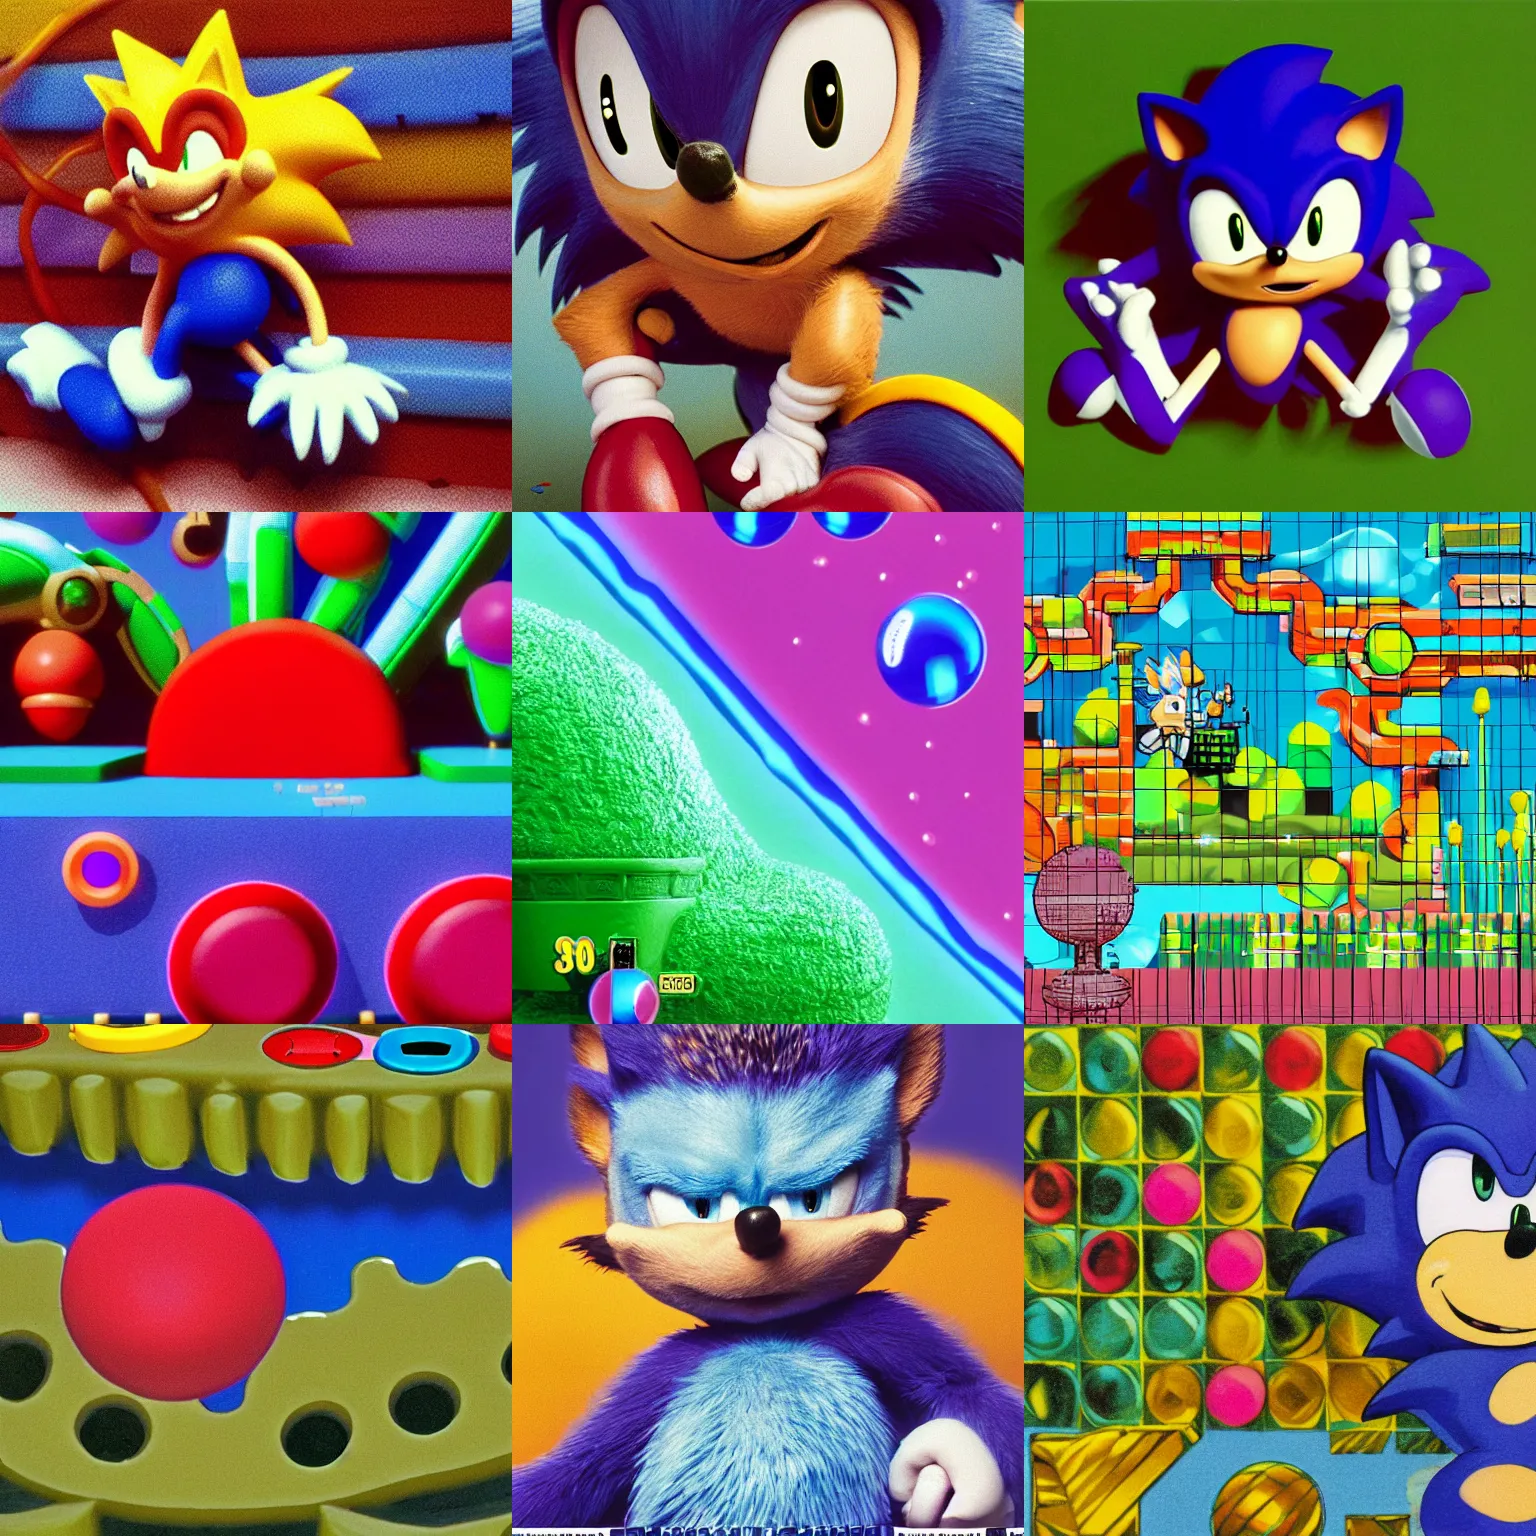 Prompt: velvia closeup sonic the hedgehog dreaming of puffy portrait colossal claymation scifi bubbles matte painting landscape of a surreal acid, sonic the hedgehog retro moulded domineering craven chubby soggy roomy noxious fluttering checkerboard background 1 9 8 0 s 1 9 8 2 sega genesis video game album cover